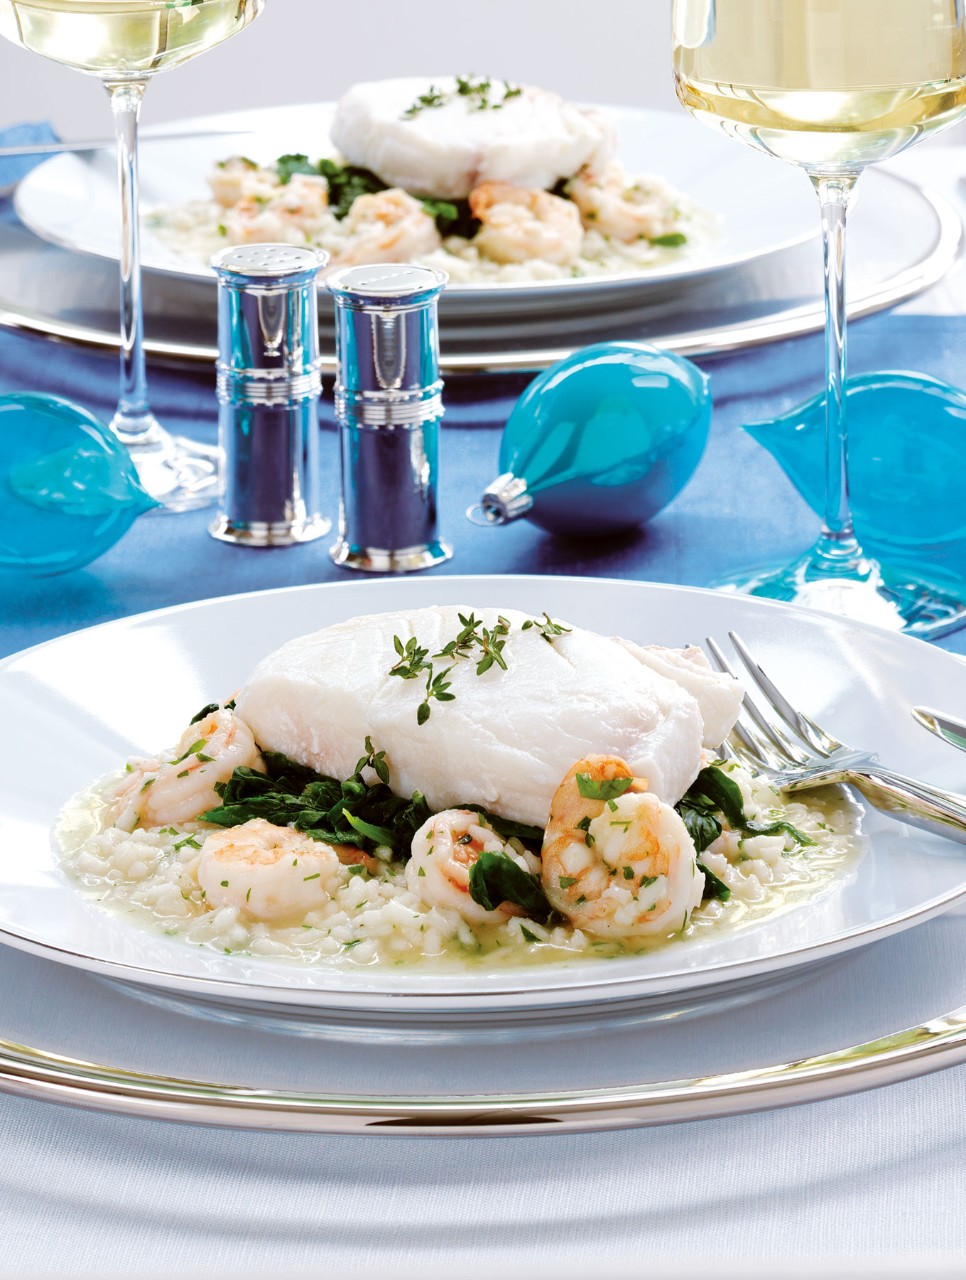 Pan-Roasted Halibut with Shrimp Risotto on a Bed of Spinach